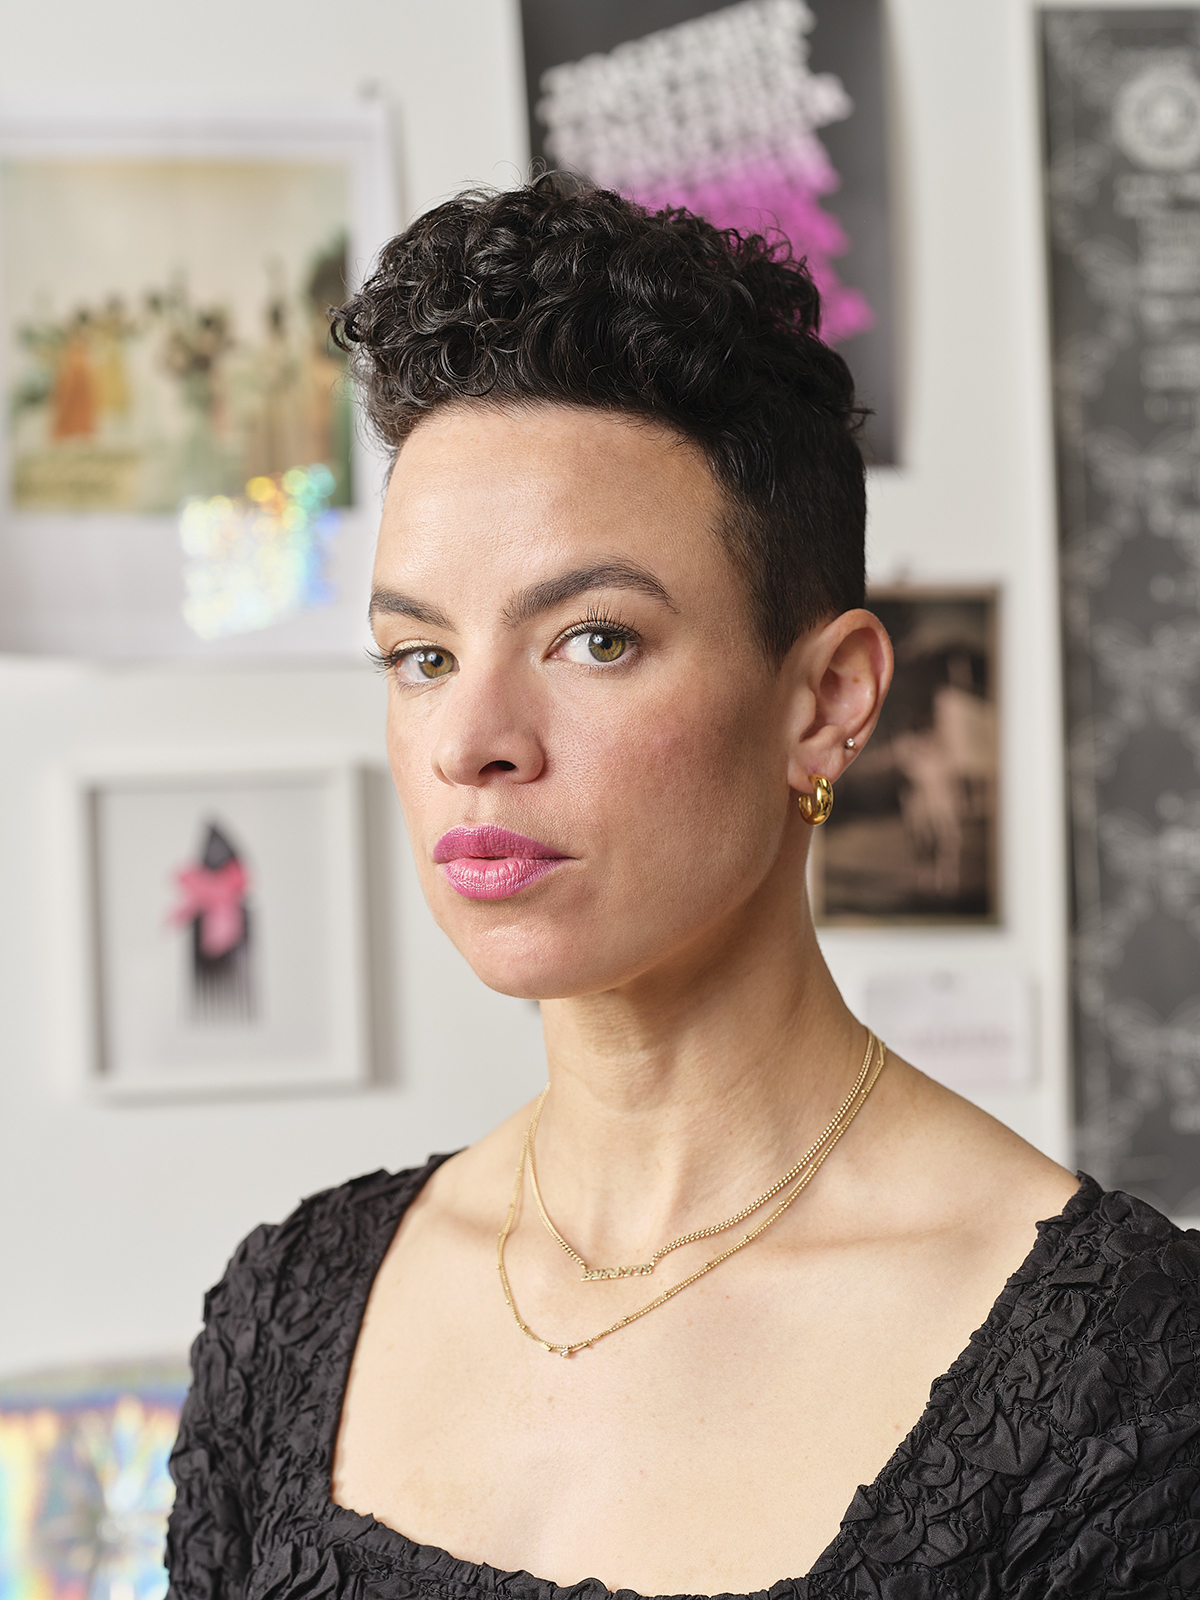 A powerful close-up of a woman artist in a gallery setting. She exudes confidence and intensity, with short, curly black hair and striking features. Her eyes are thoughtful, perhaps challenging the viewer, highlighted with makeup that accentuates her expressive gaze. She wears a textured black top that adds depth to the composition, along with tasteful gold jewelry—a pair of earrings and layered necklaces. In the background, the white walls are adorned with various artworks that speak to the vibrancy of the creative space she inhabits.